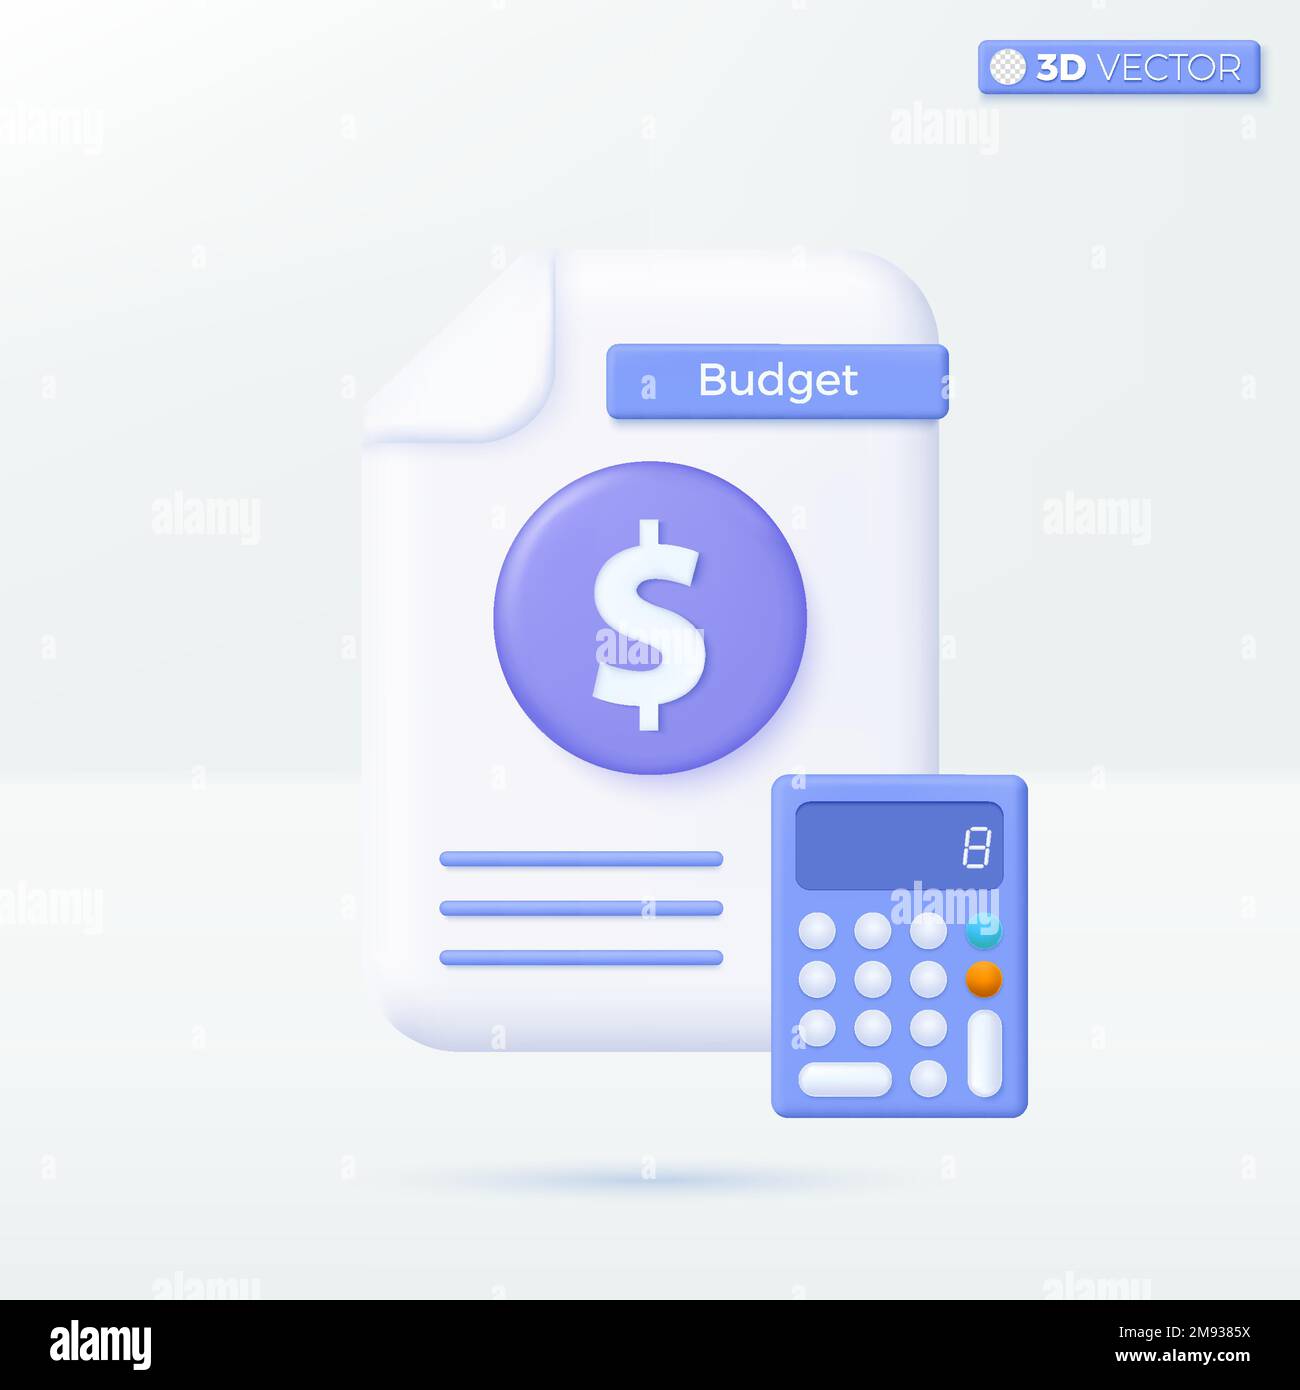 Budged Document and calculator icon symbols. financial report, digital accounting, budget forecast, accounting report concept. 3D vector isolated illu Stock Vector